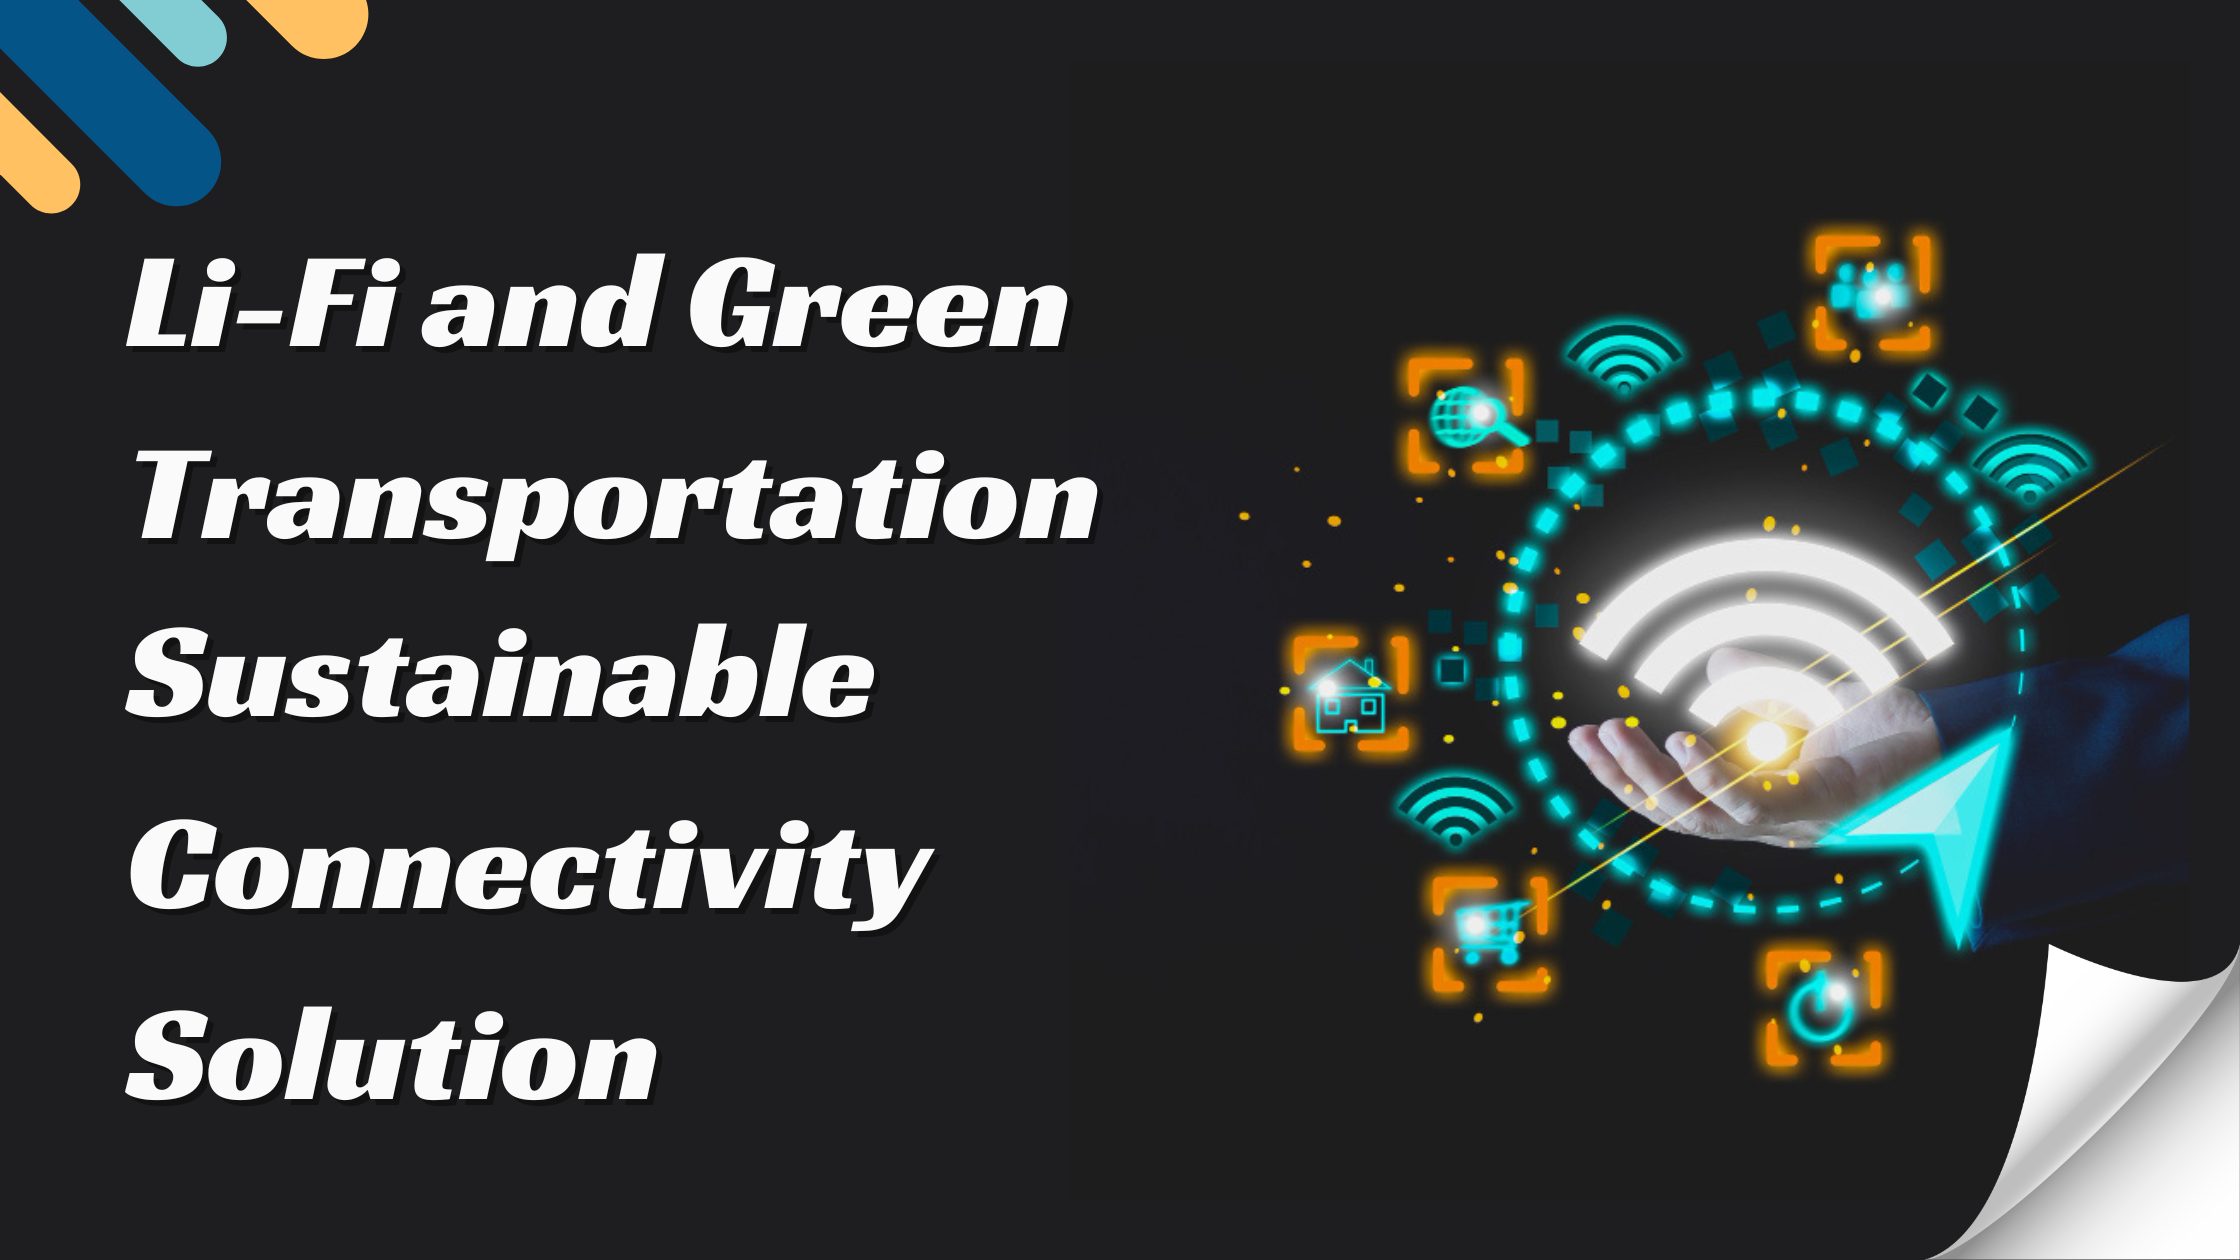 Li-Fi and Green Transportation: A Sustainable Connectivity Solution